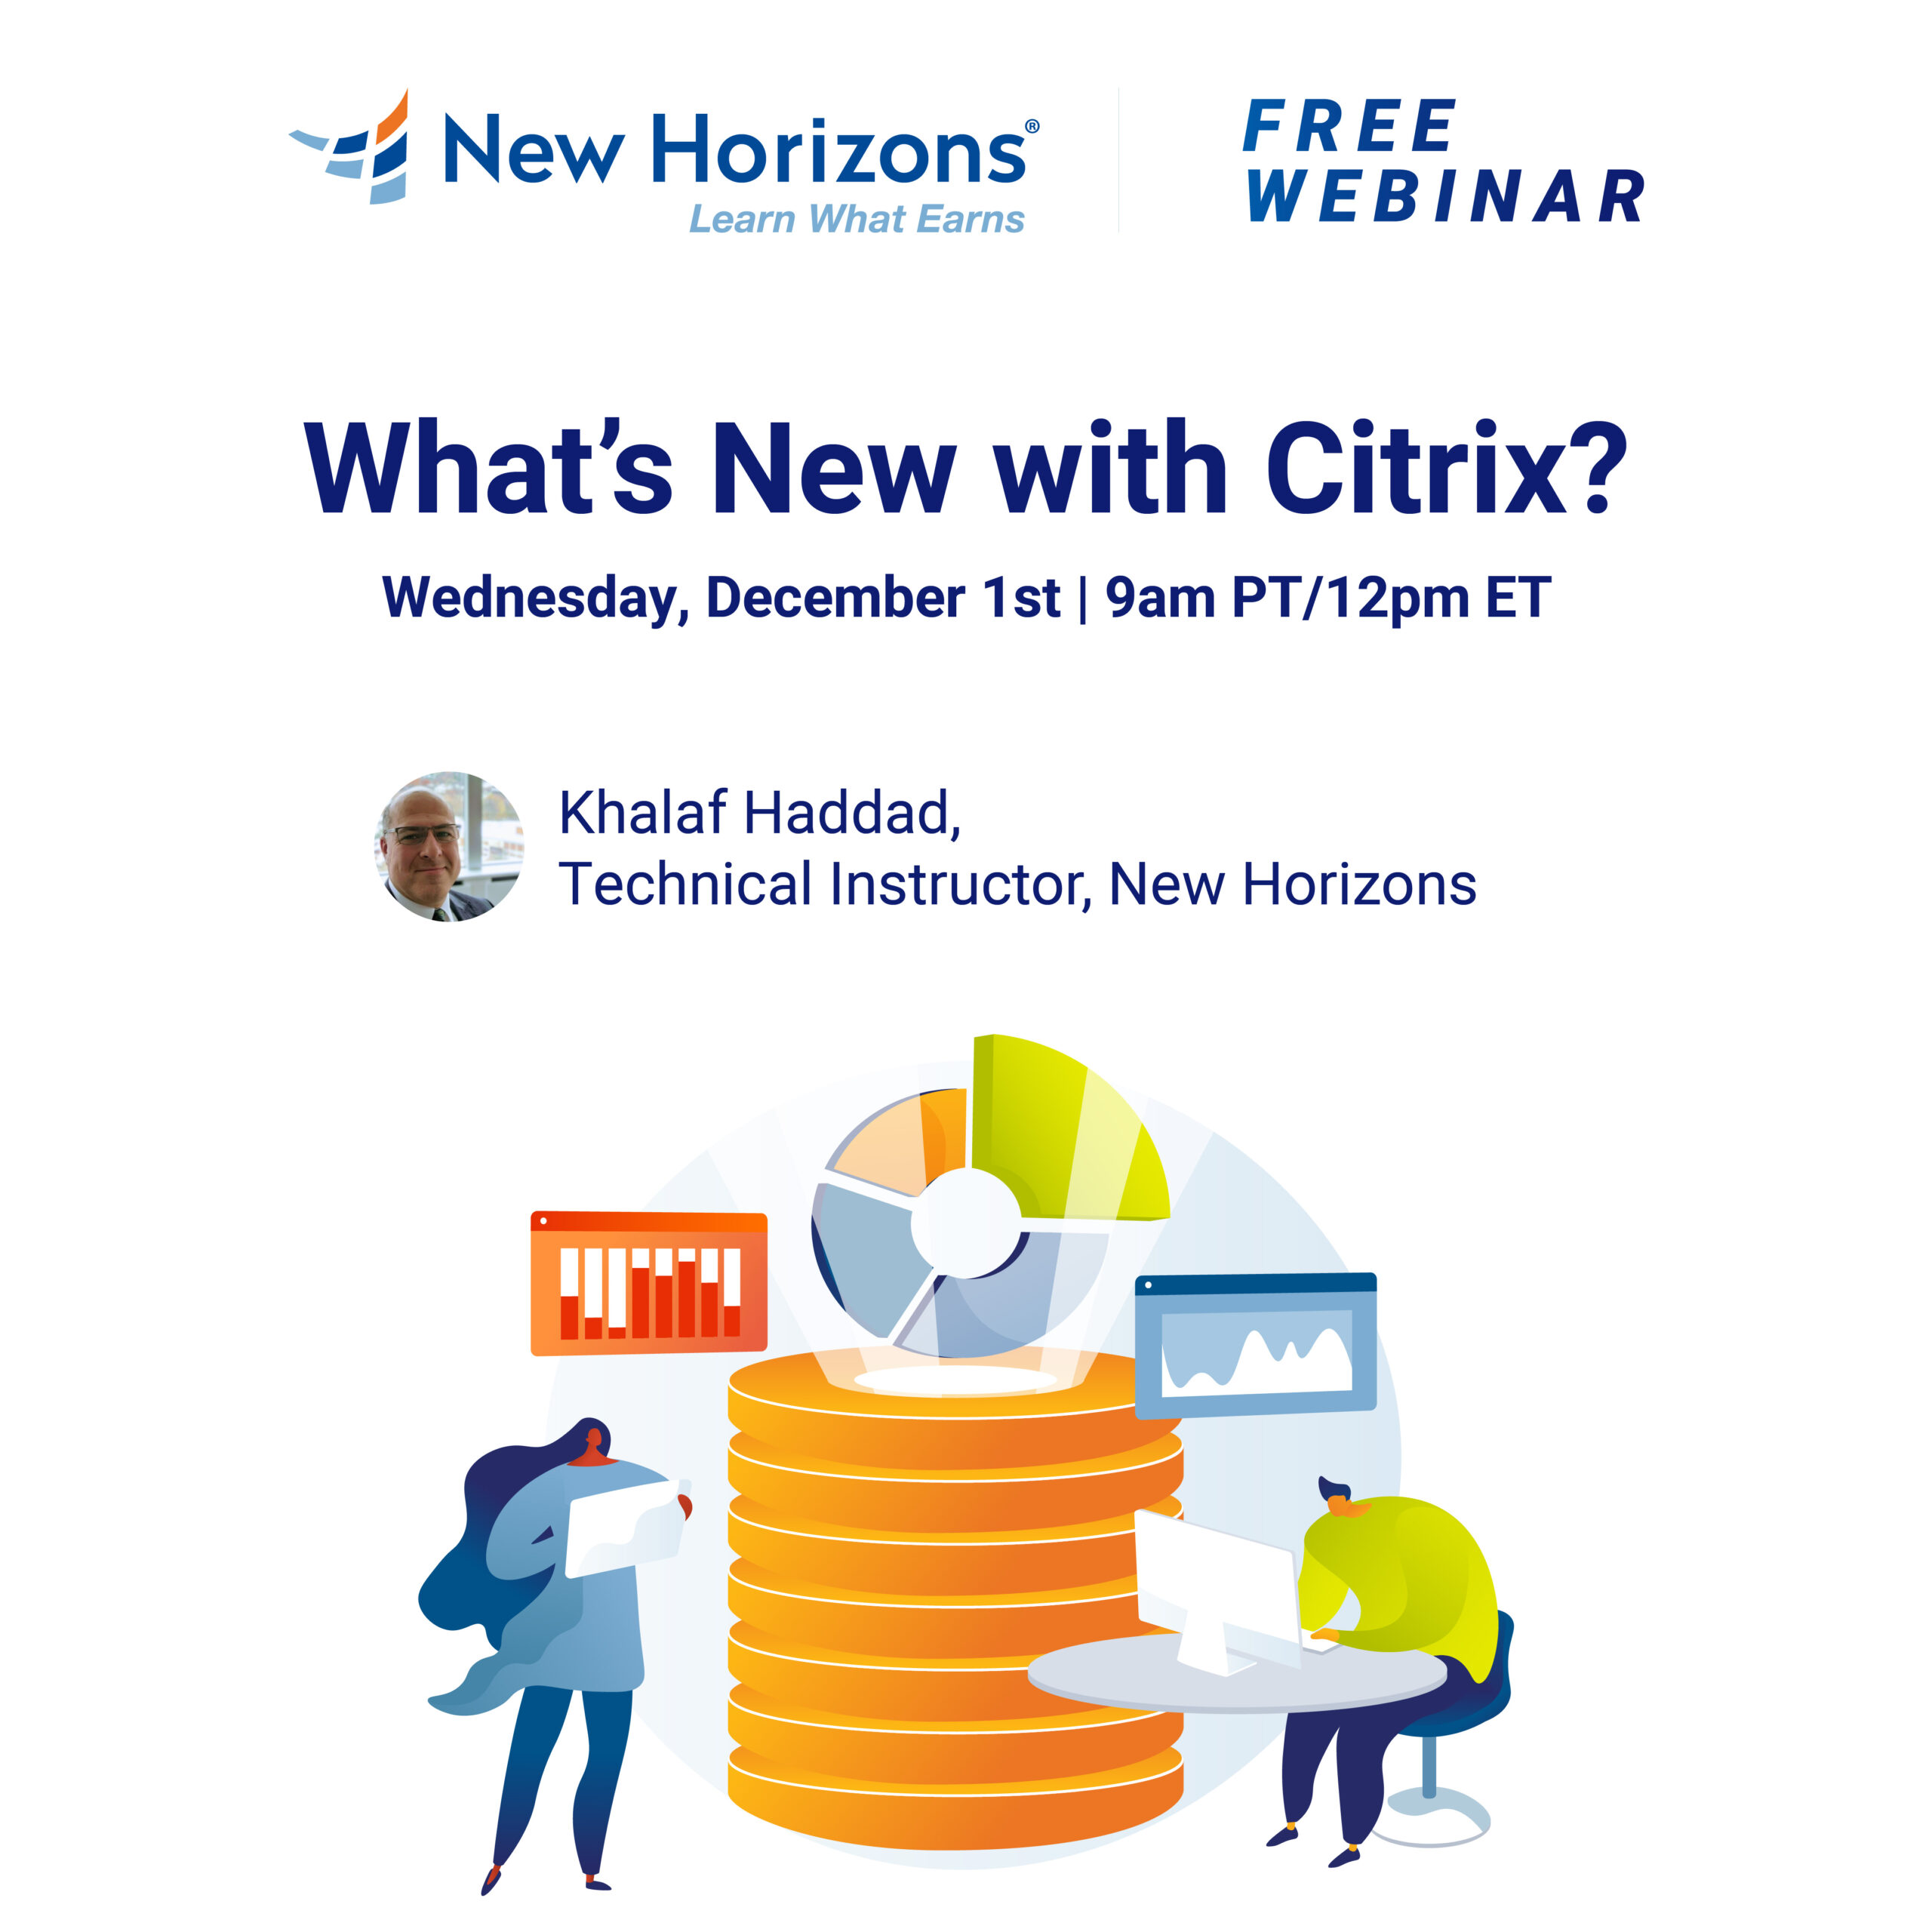 What’s New with Citrix?